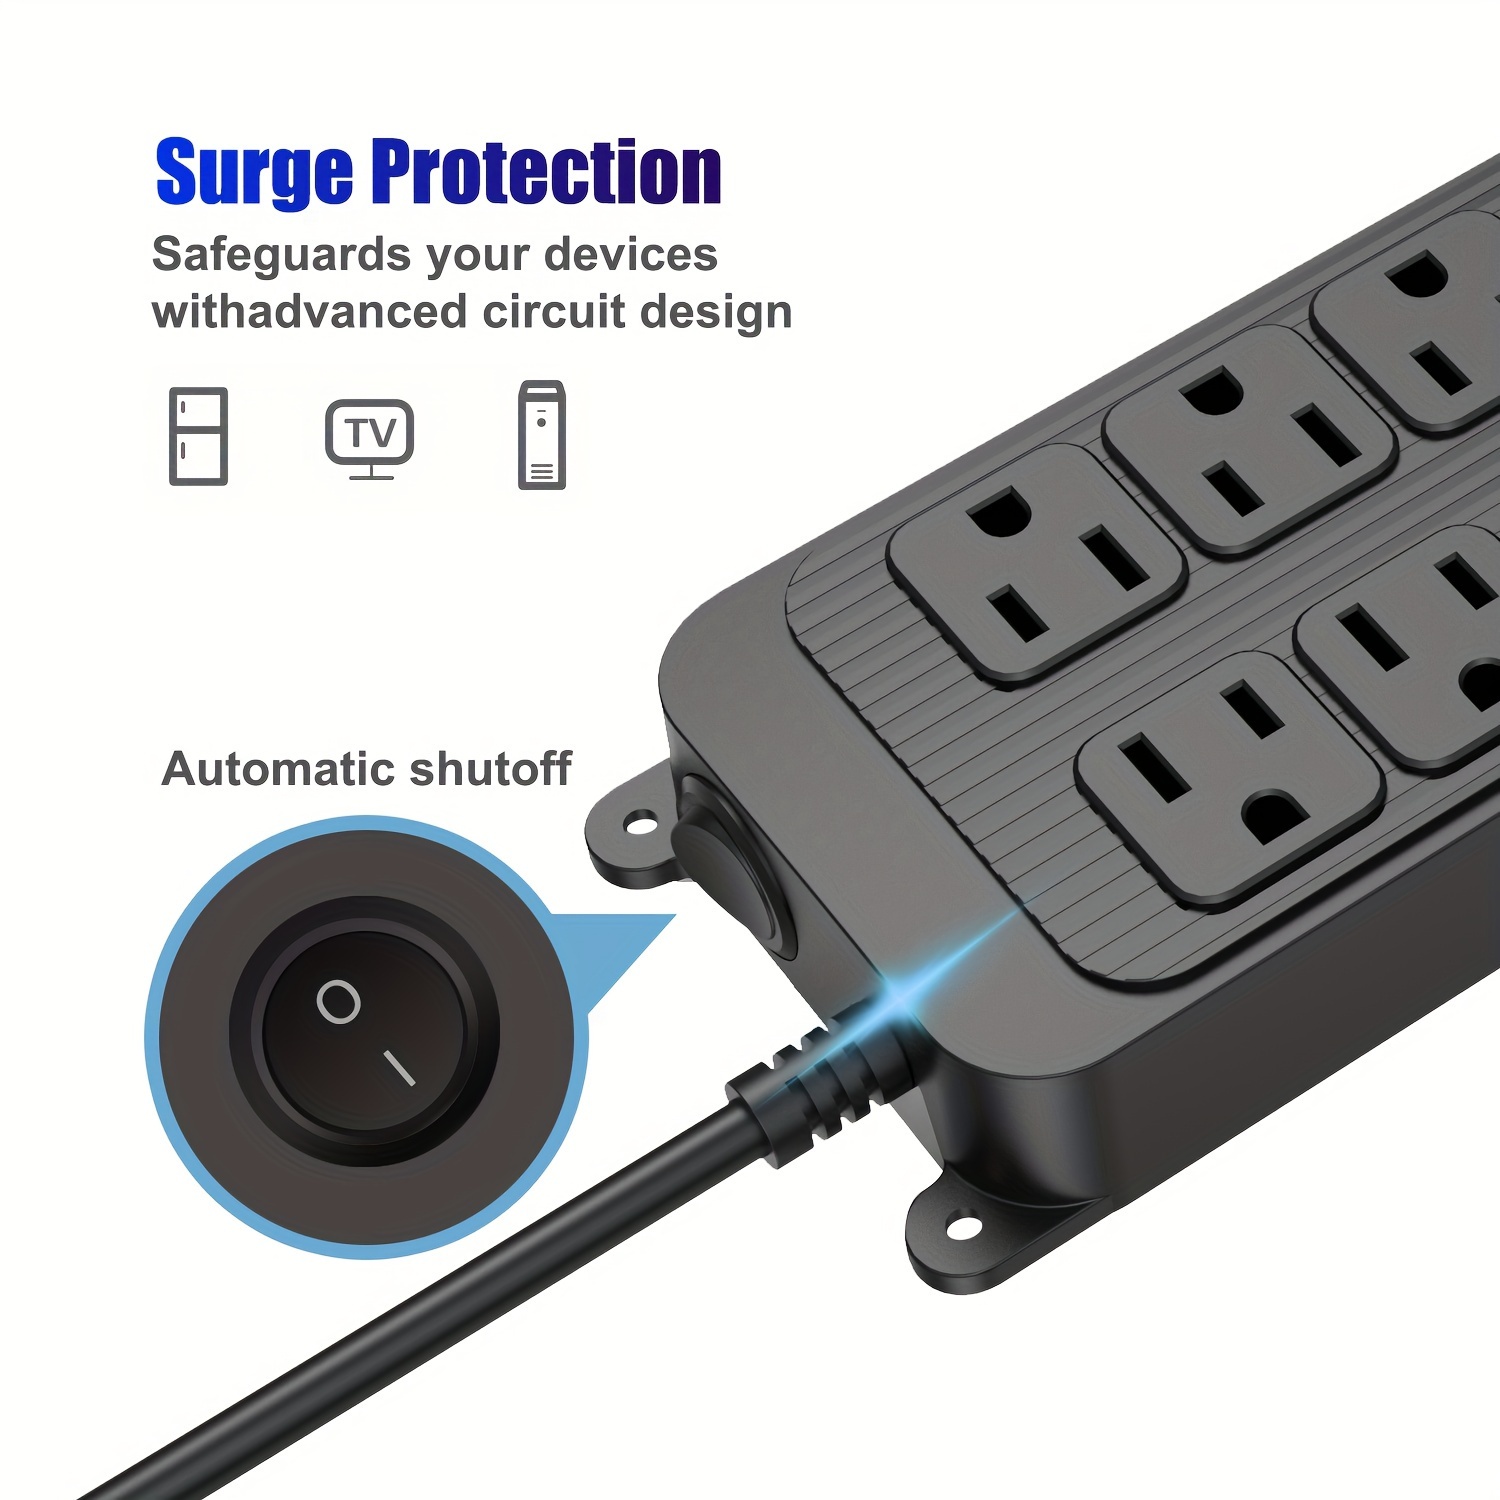 Surge Protector Power Strip , Extension Cord with 8 Outlets and 4 USB  Ports, 6